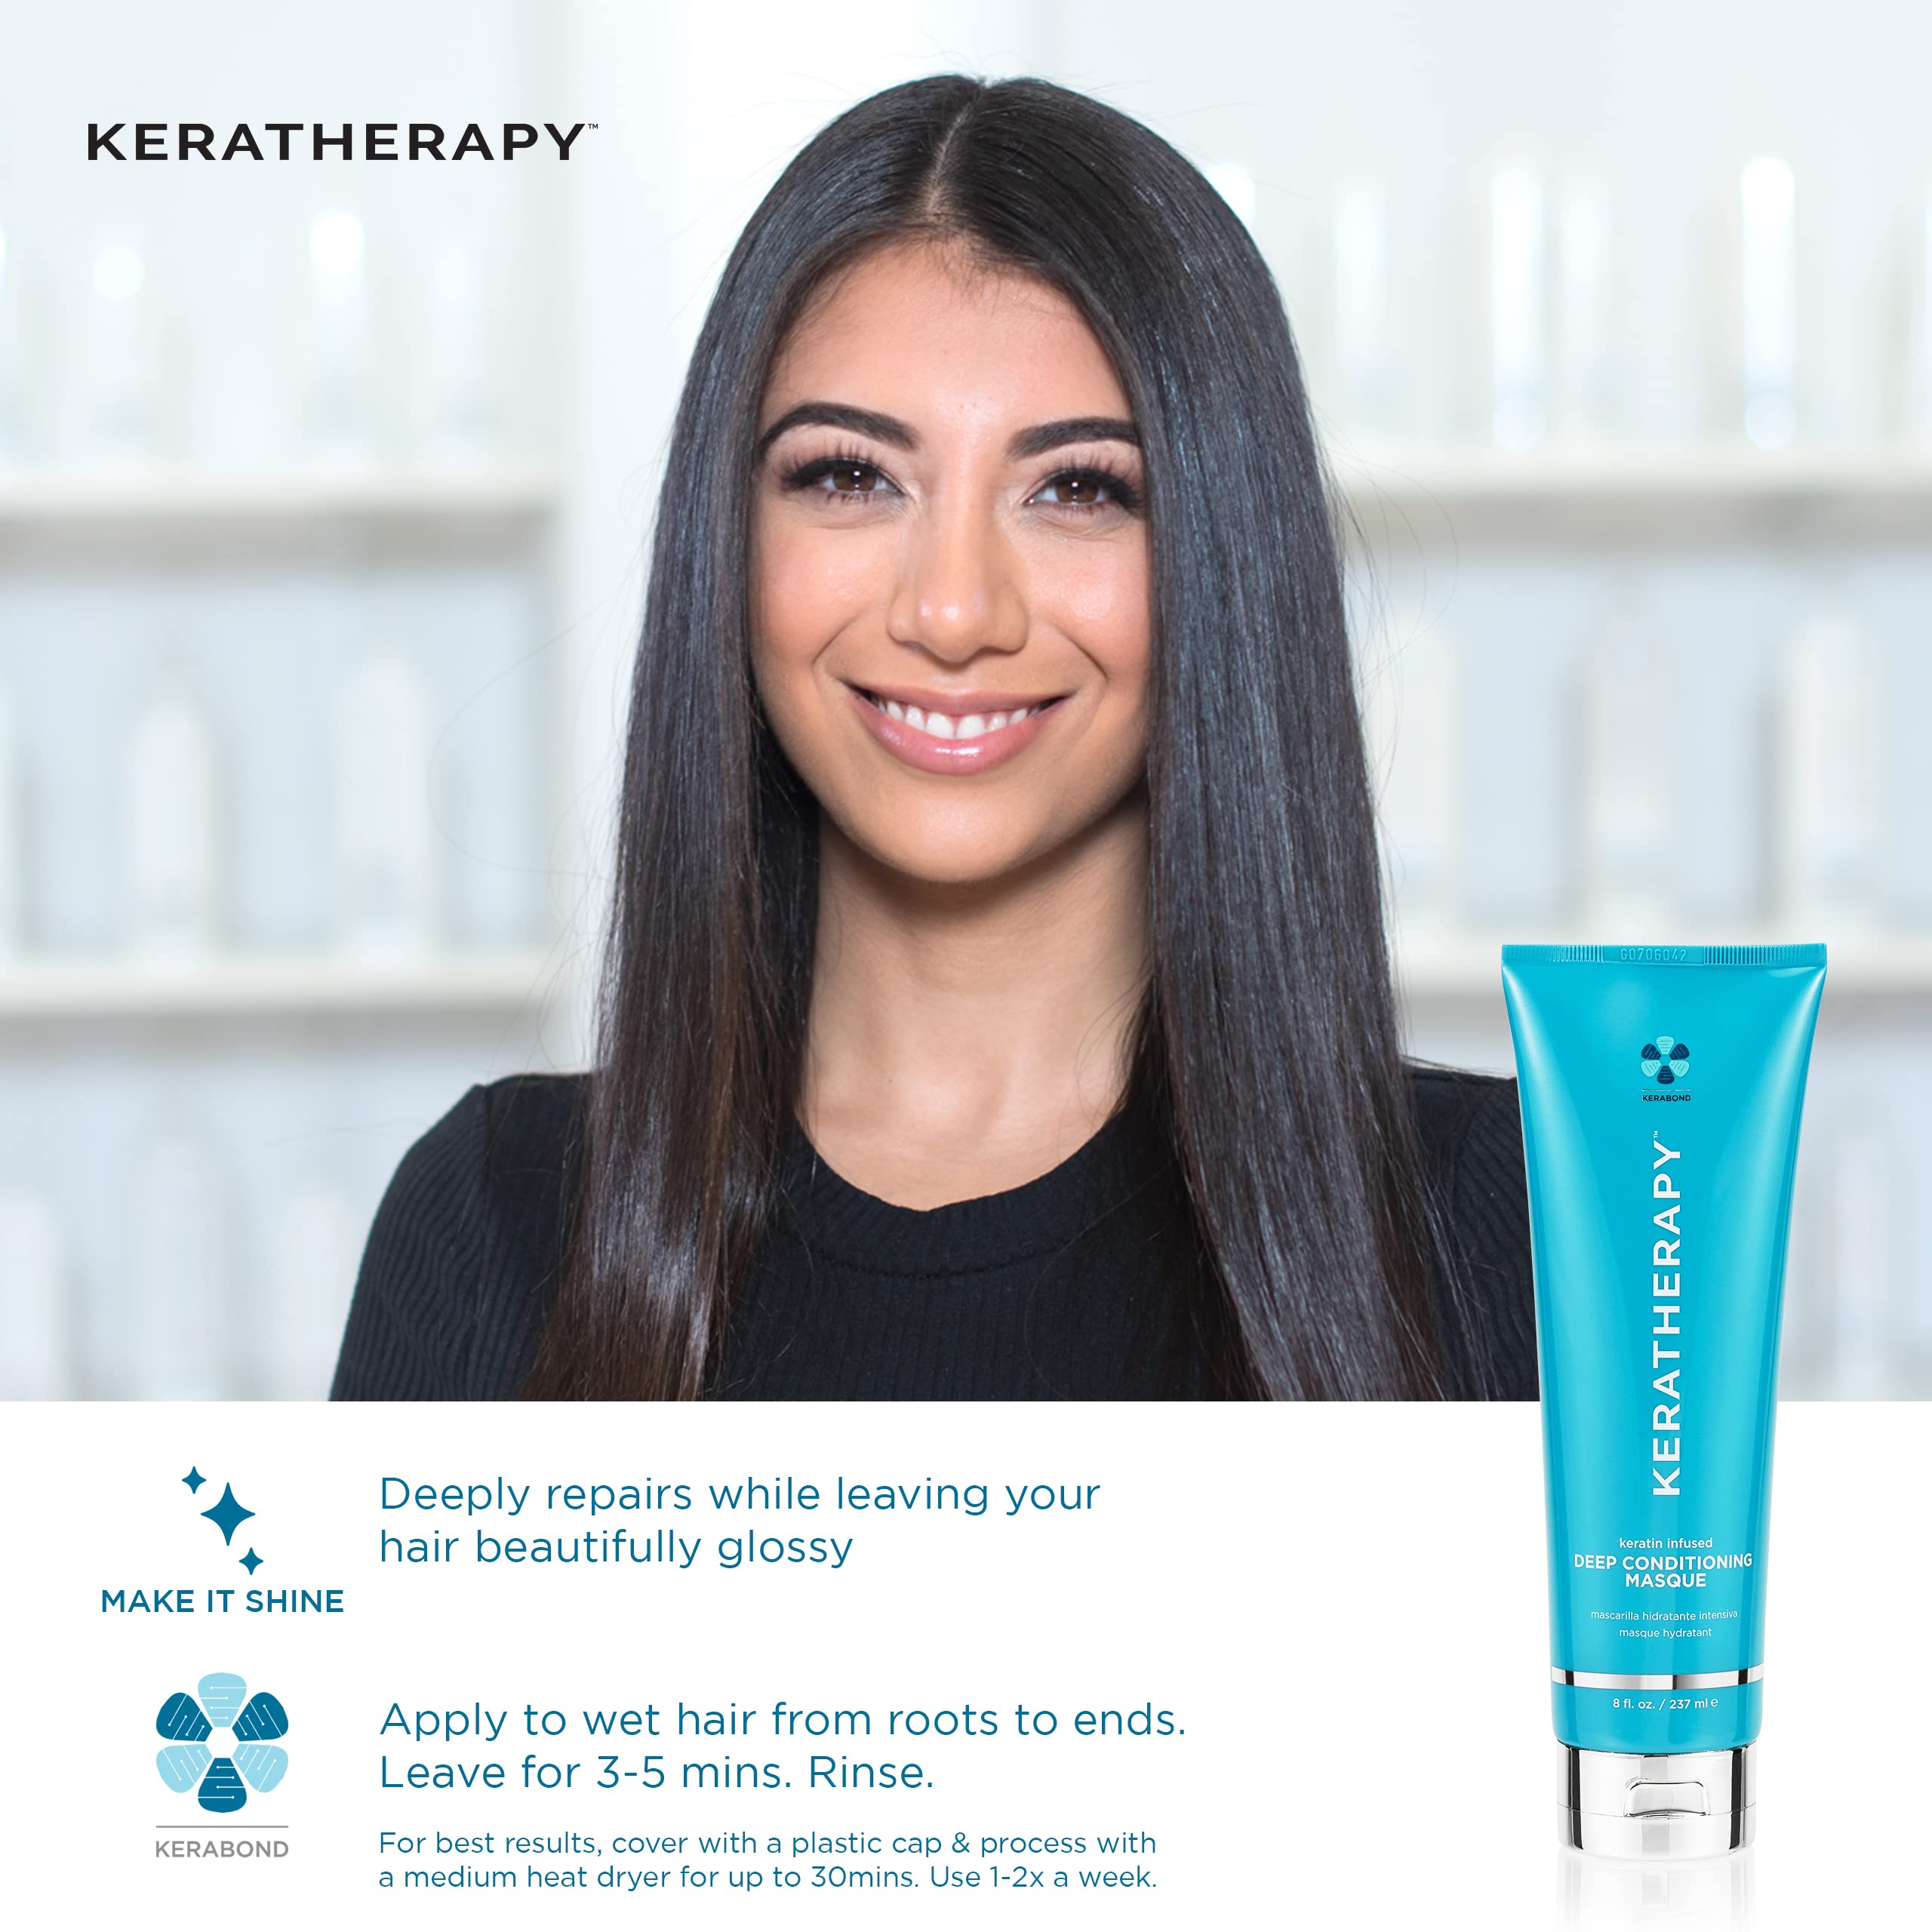 Keratherapy Keratin Infused Moisture Leave In Conditioner Spray, 8.5 fl. oz., 251 ml - Hydrating Leave in Conditioner Spray with Jojoba Oil, Panthenol, Arginine Amino Acid & Wheat Oil for Damaged Hair